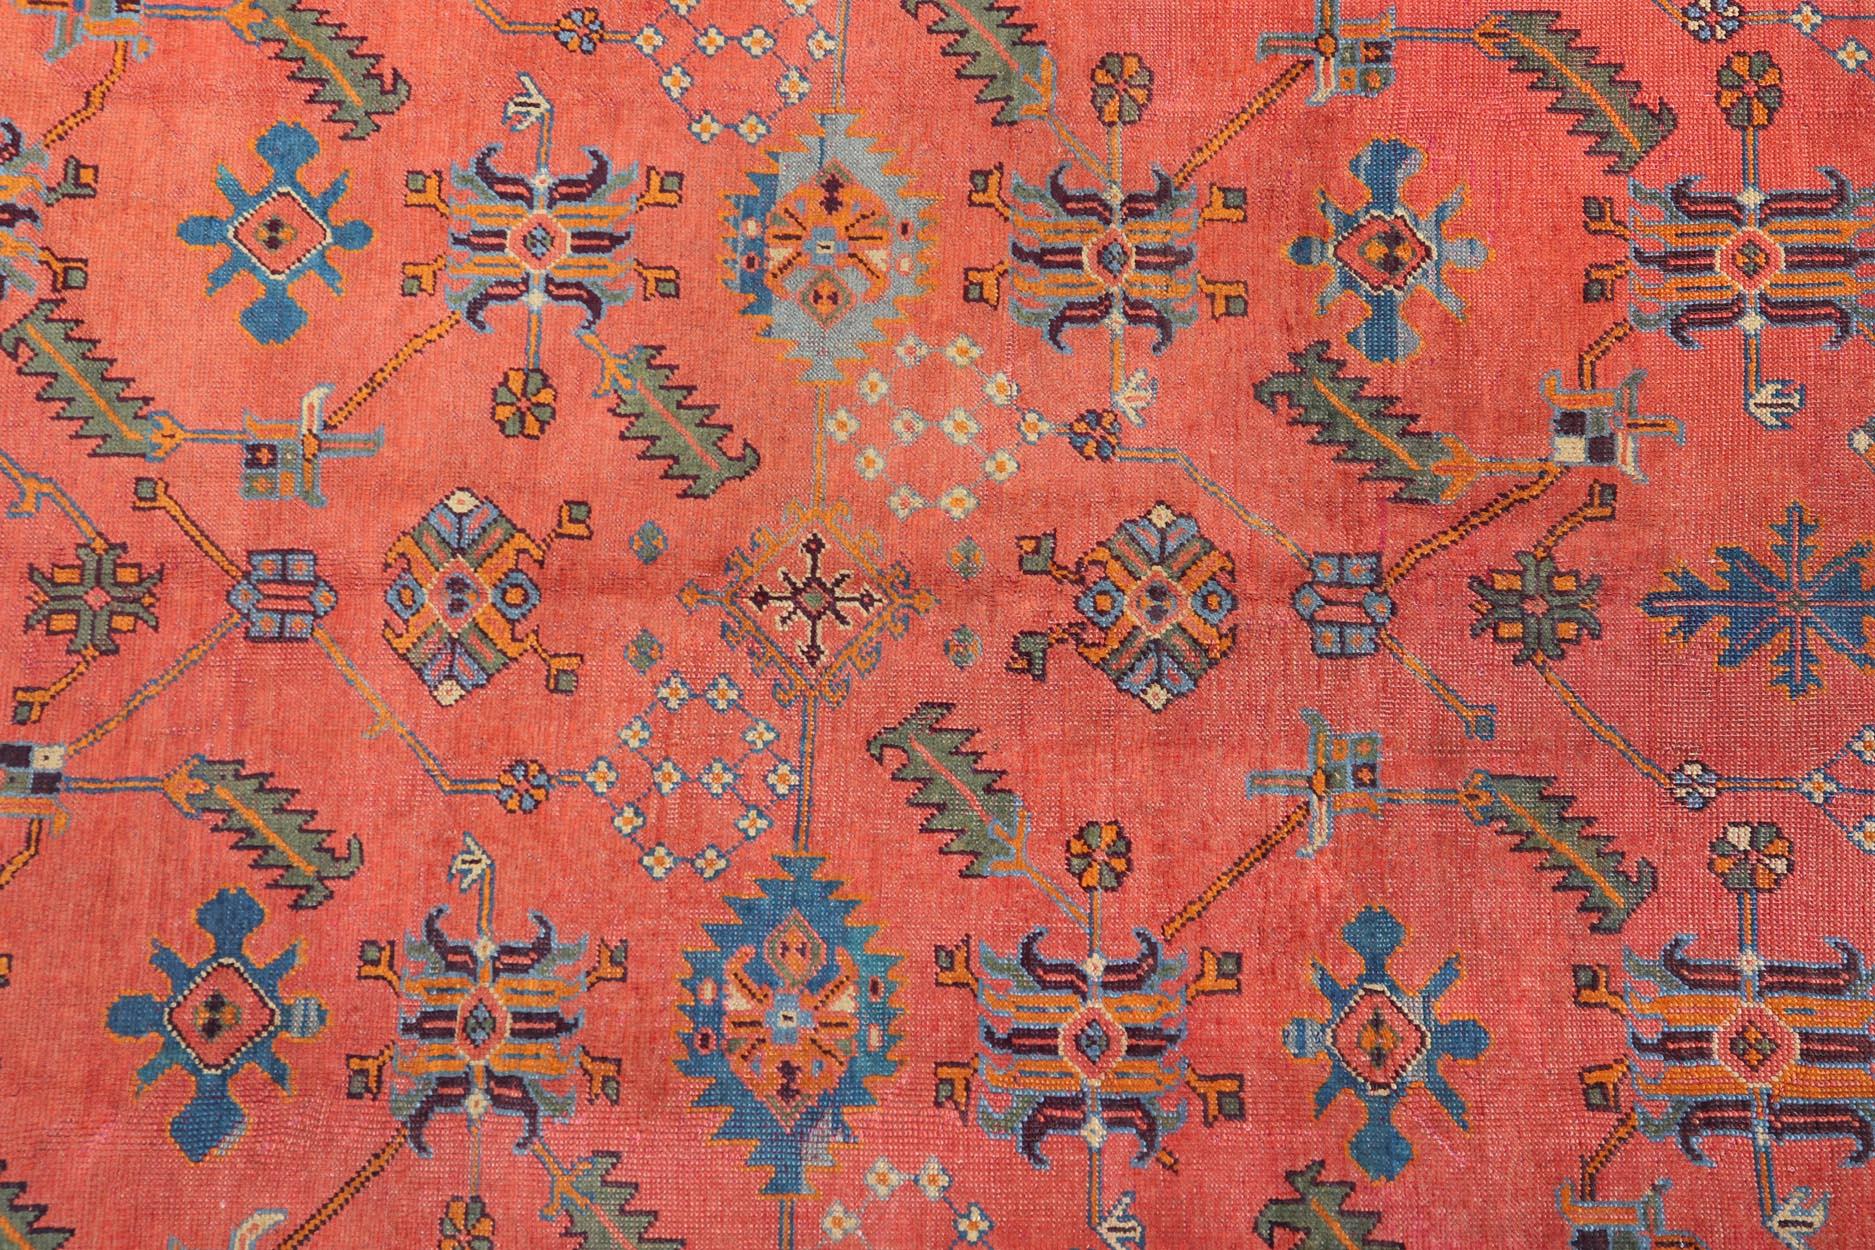 Antique Turkish Oushak Colorful Rug With All-Over Design In Salmon and Blue's  For Sale 7